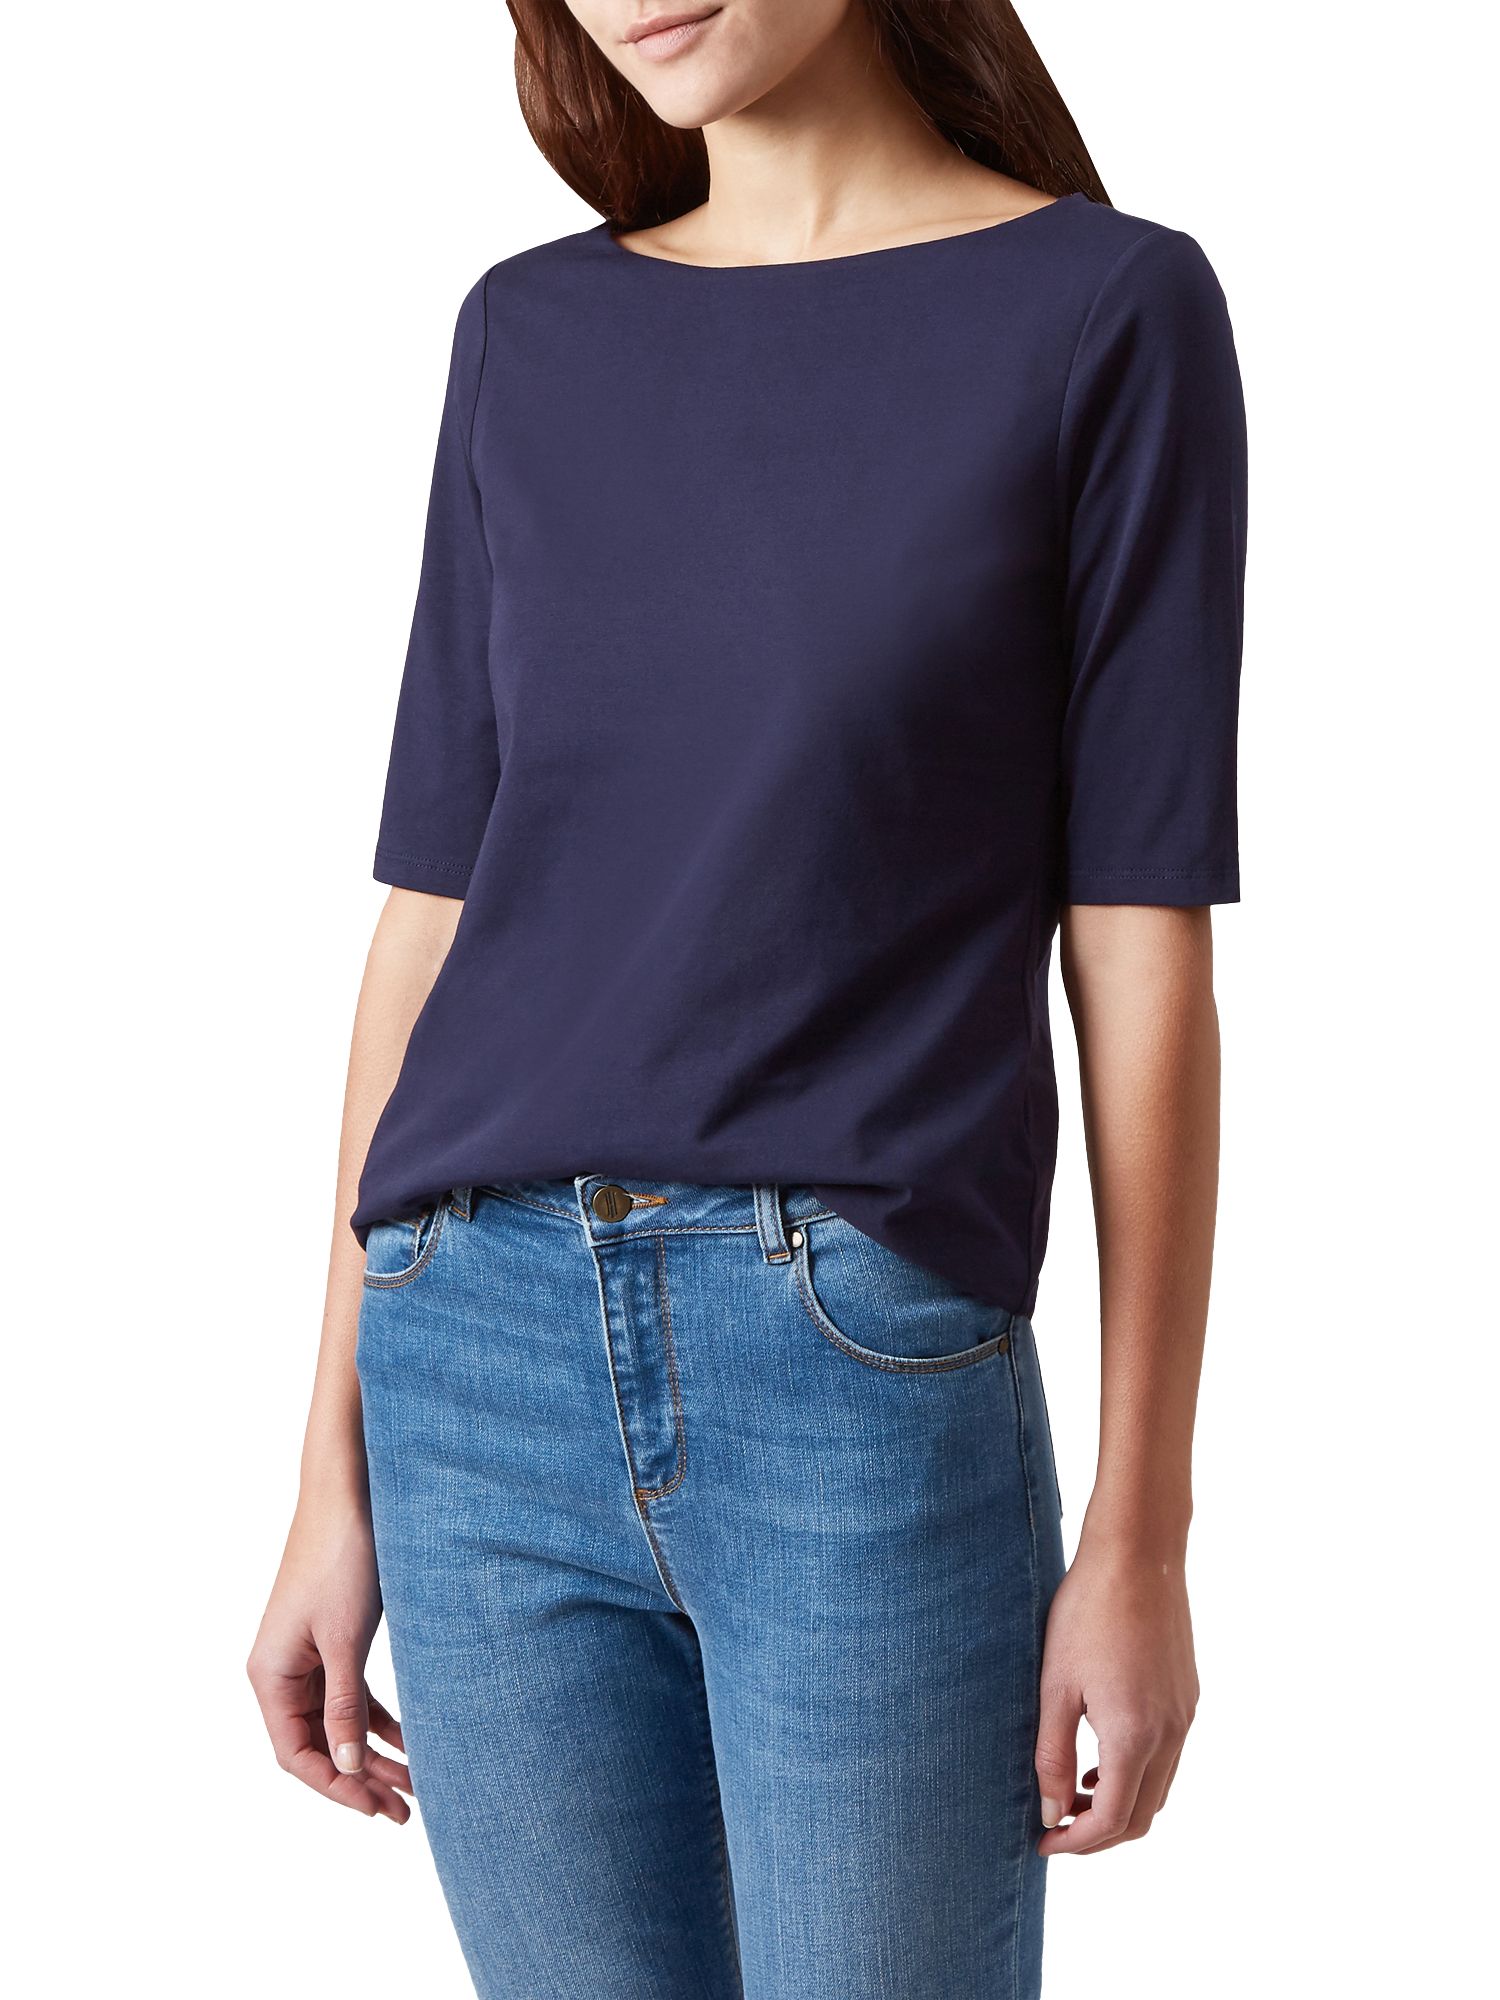 Hobbs Paige Top, French Blue, XS